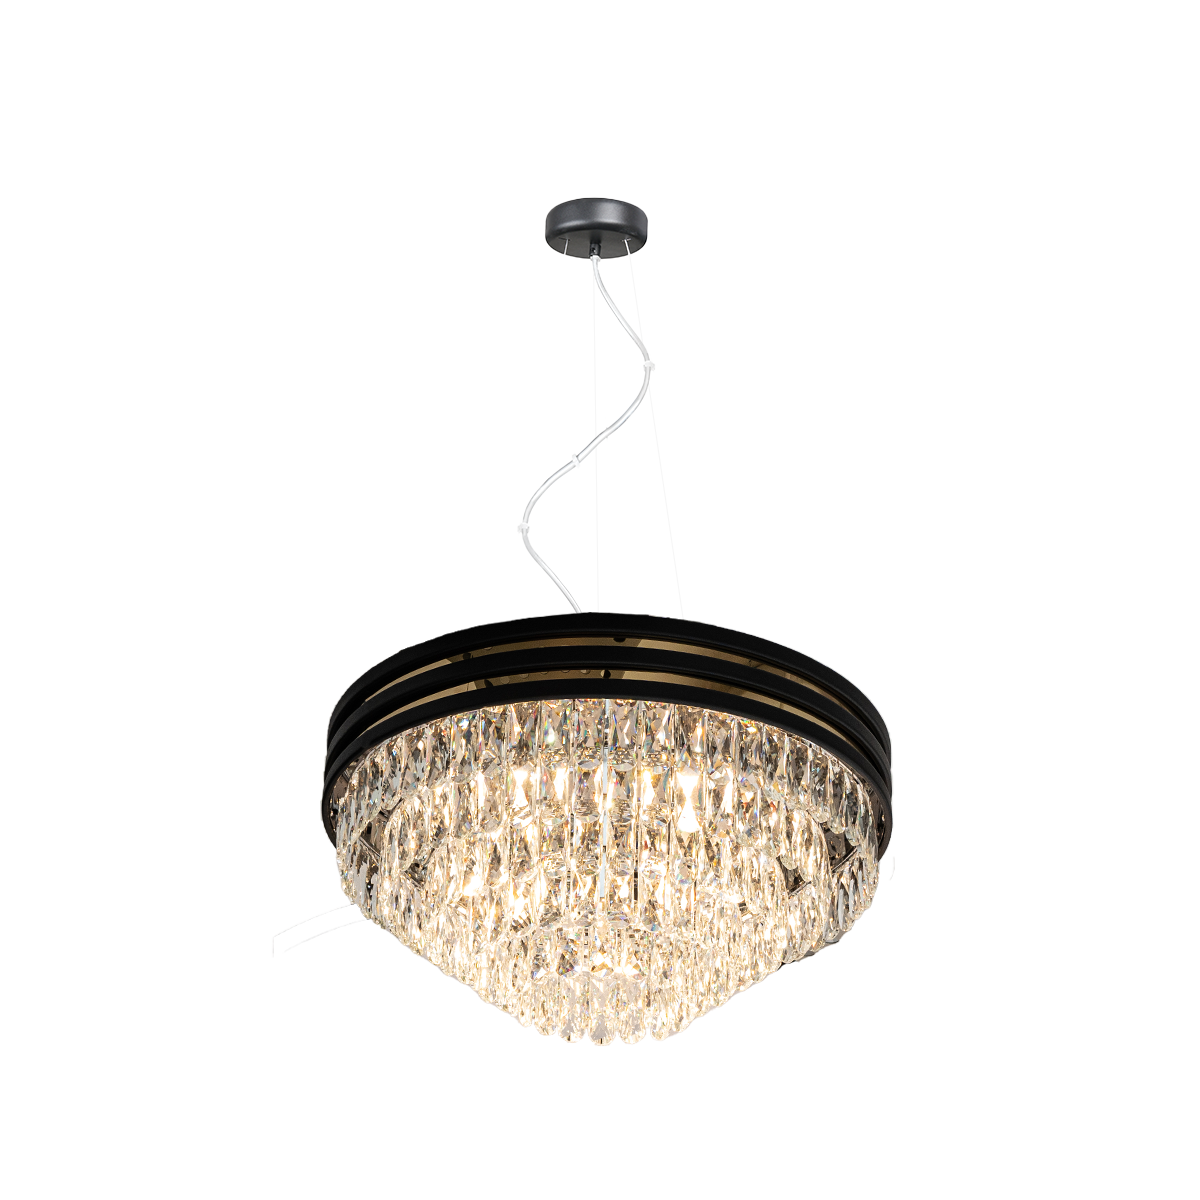 Philips Naica suspended Chandelier